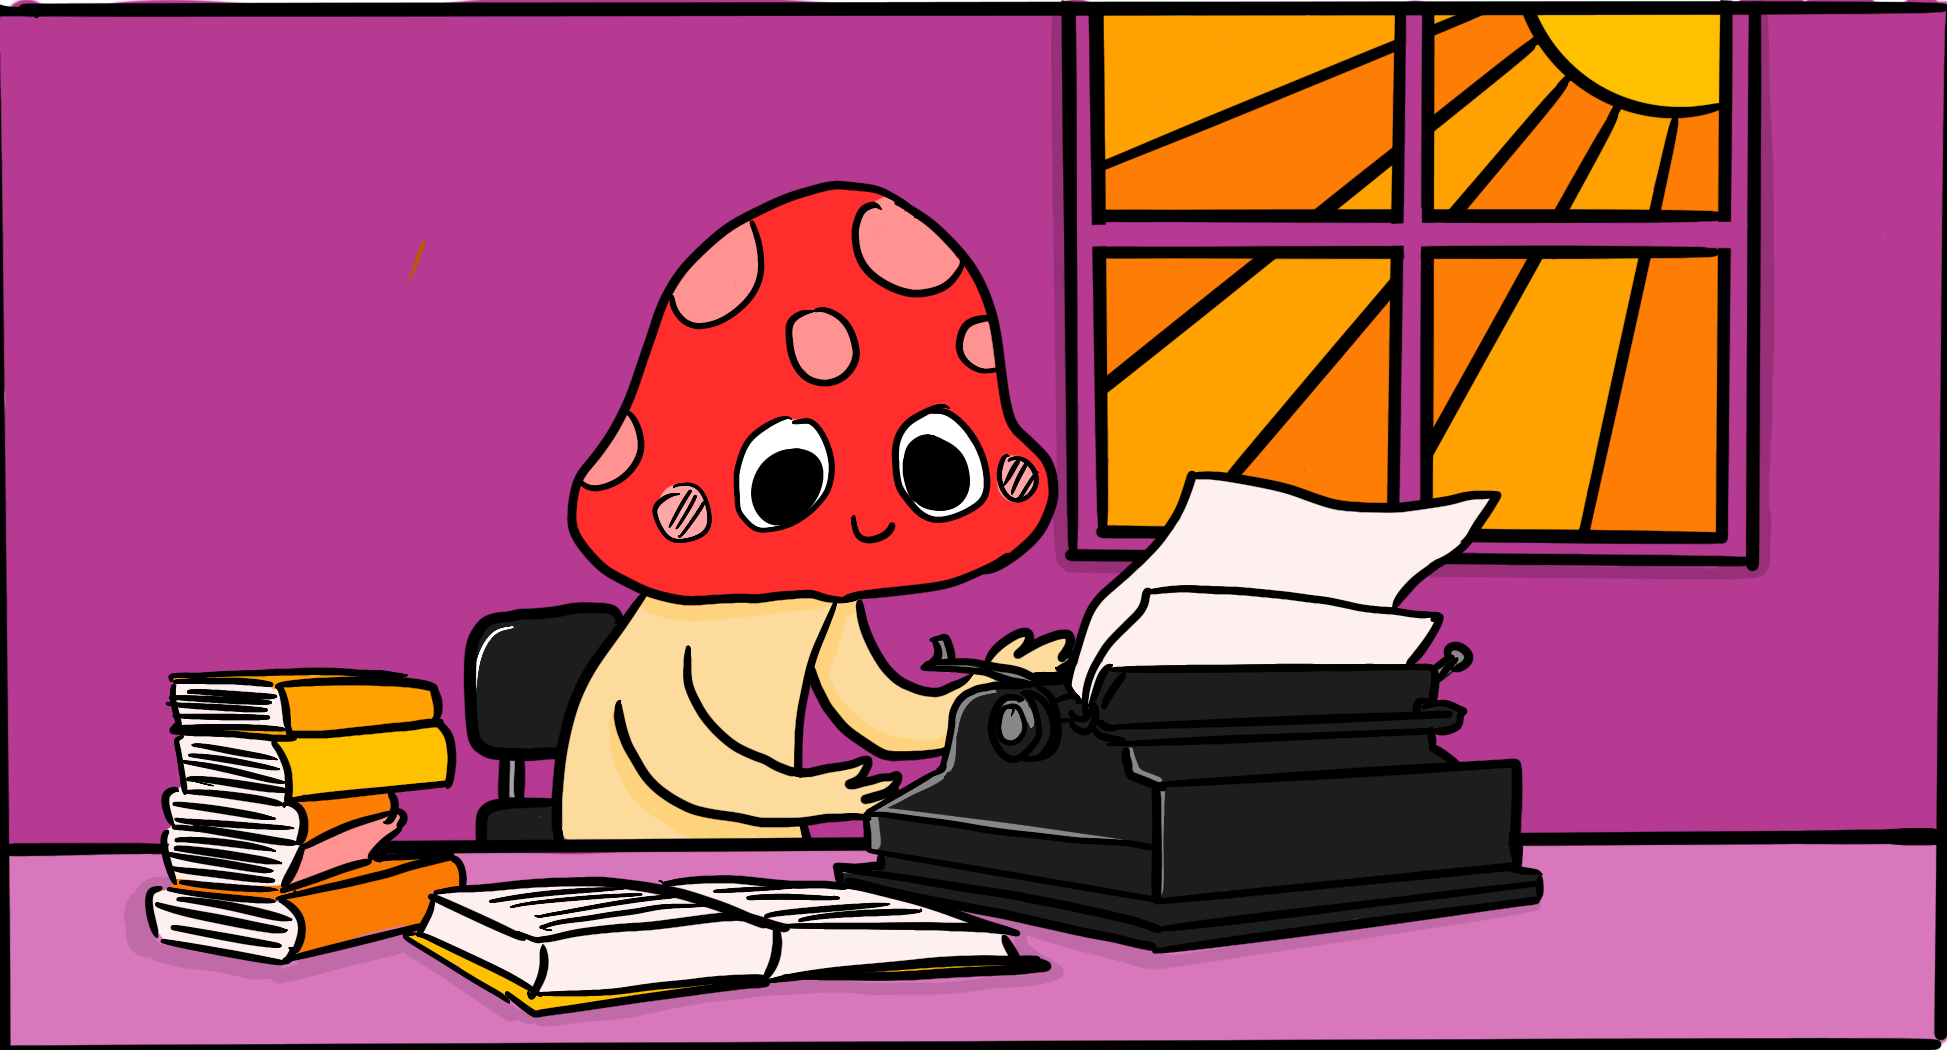 Button sitting in a purple office using a typewriter. There is an open book beside him along with a pile on books on the table. A window behind him shows the sun shining brightly. 